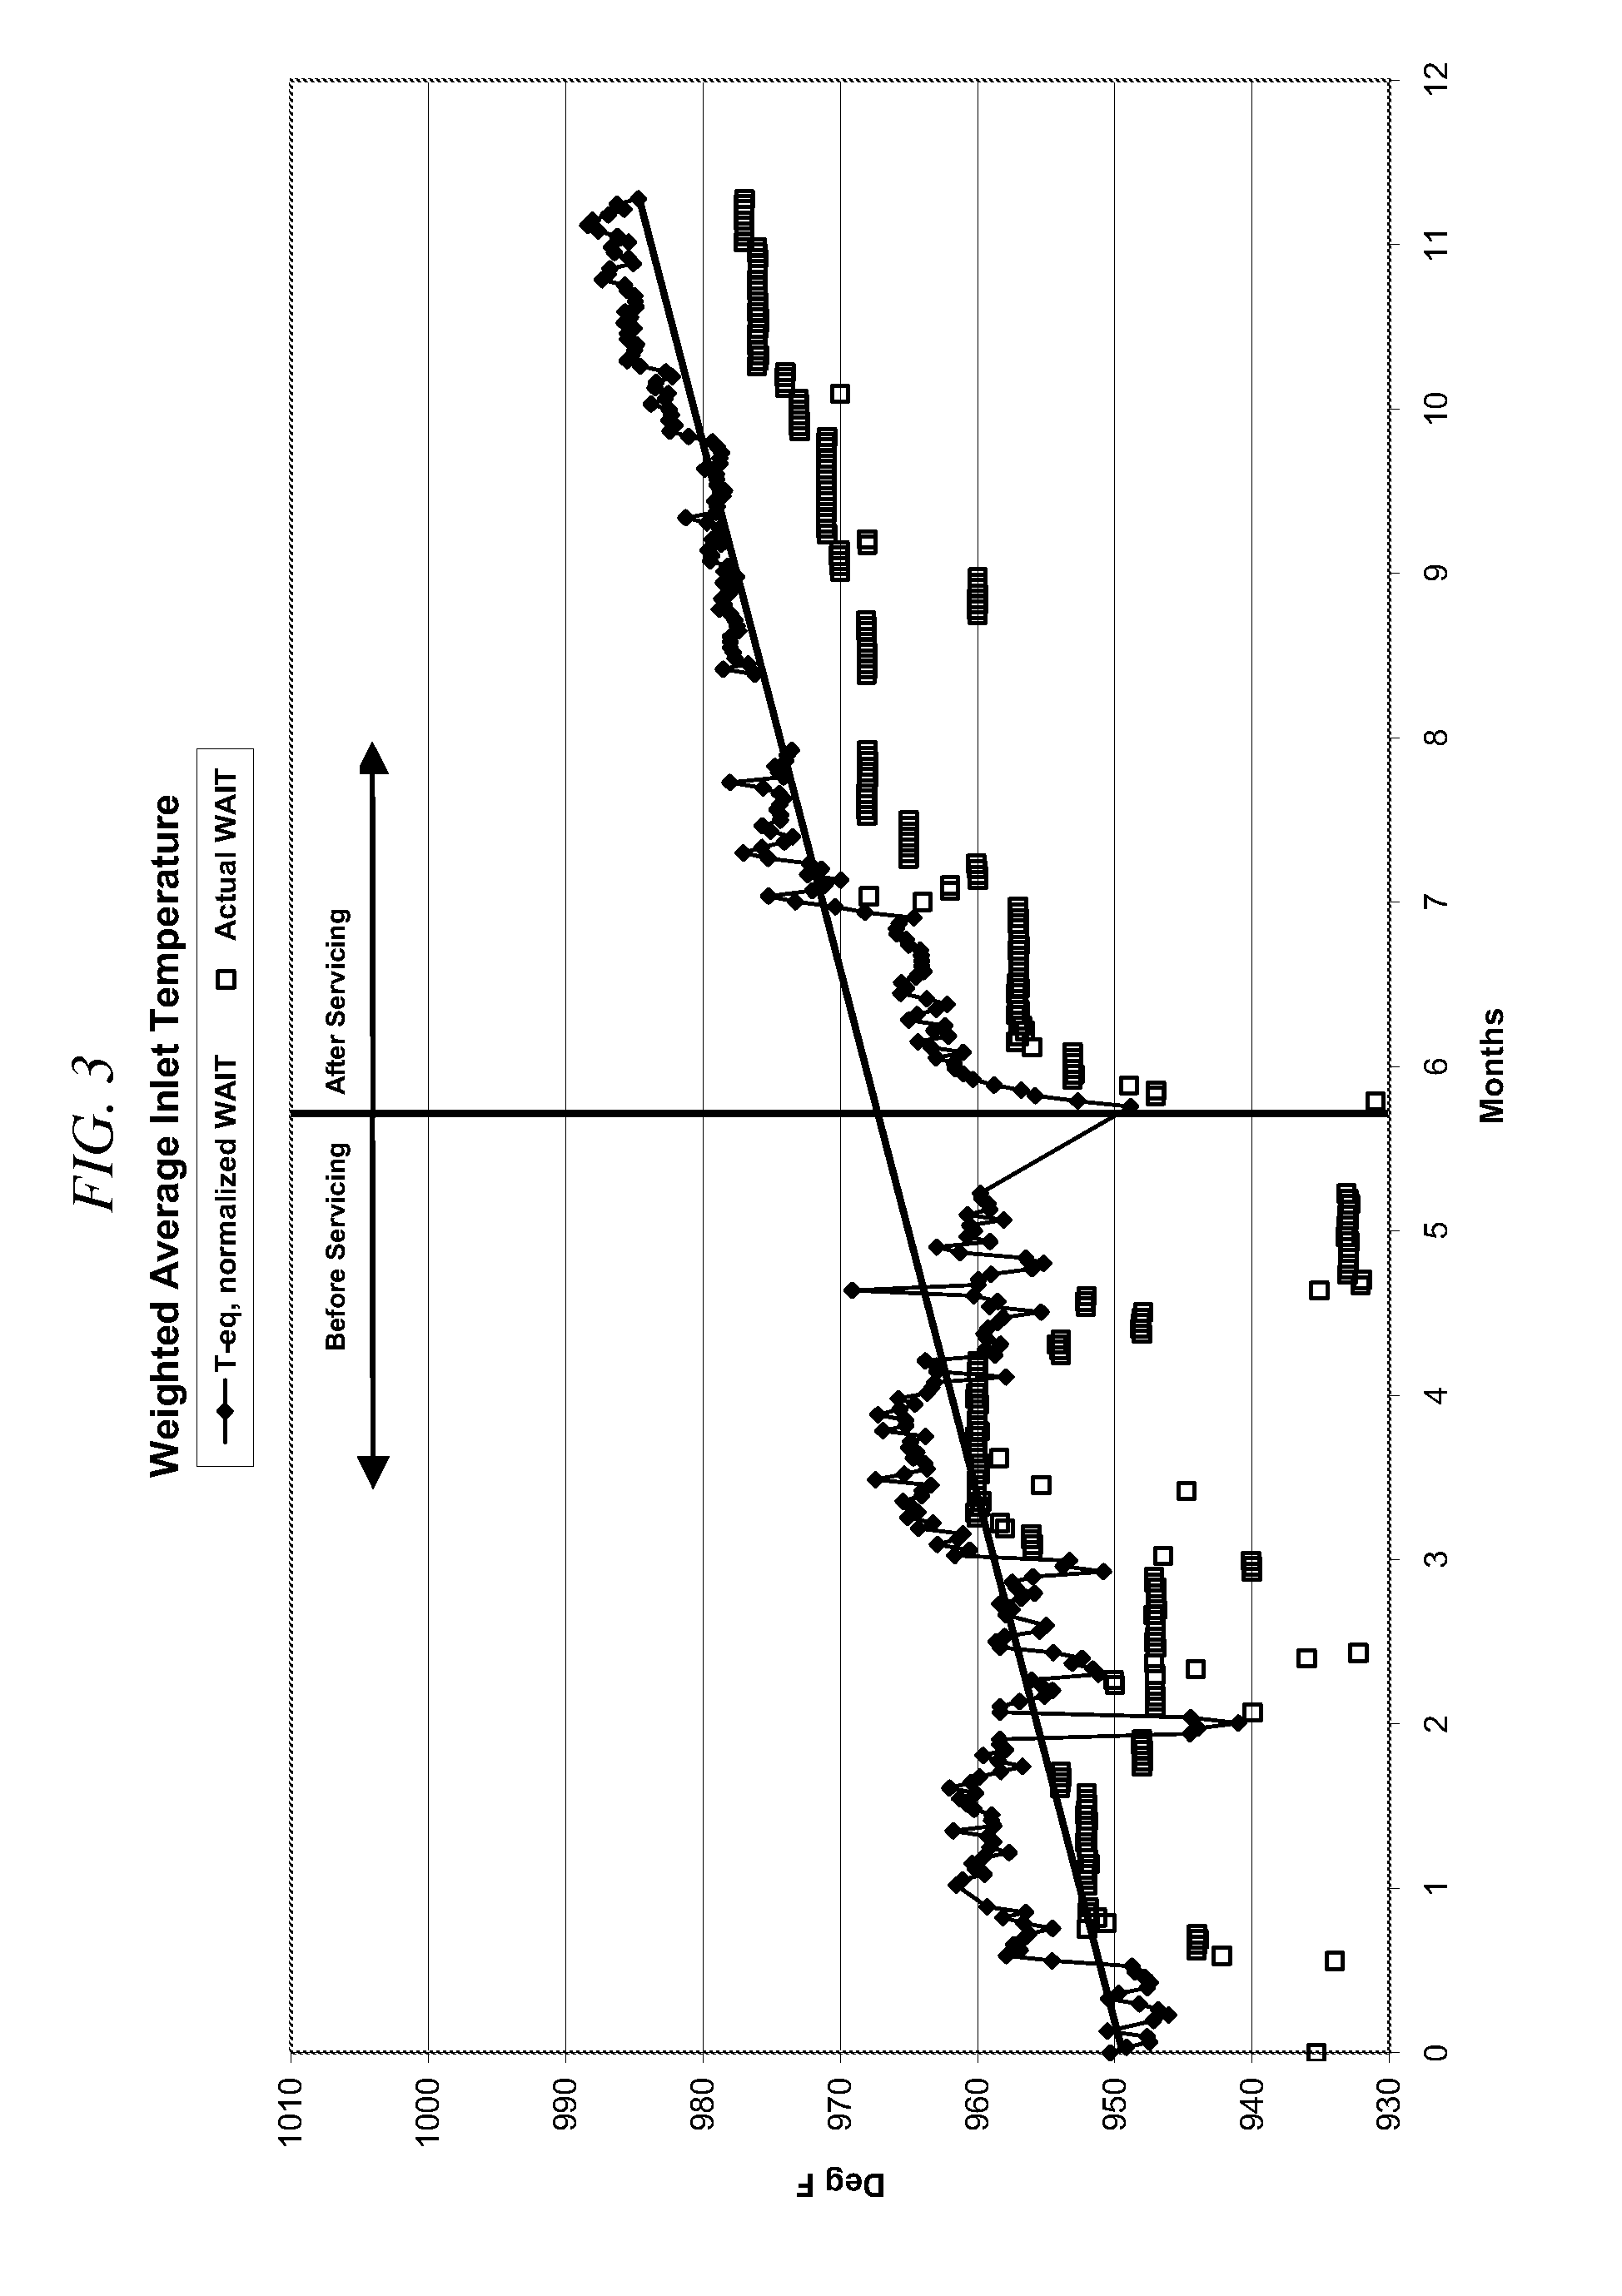 Method of treating a catalytic reactor system prior to reactor servicing